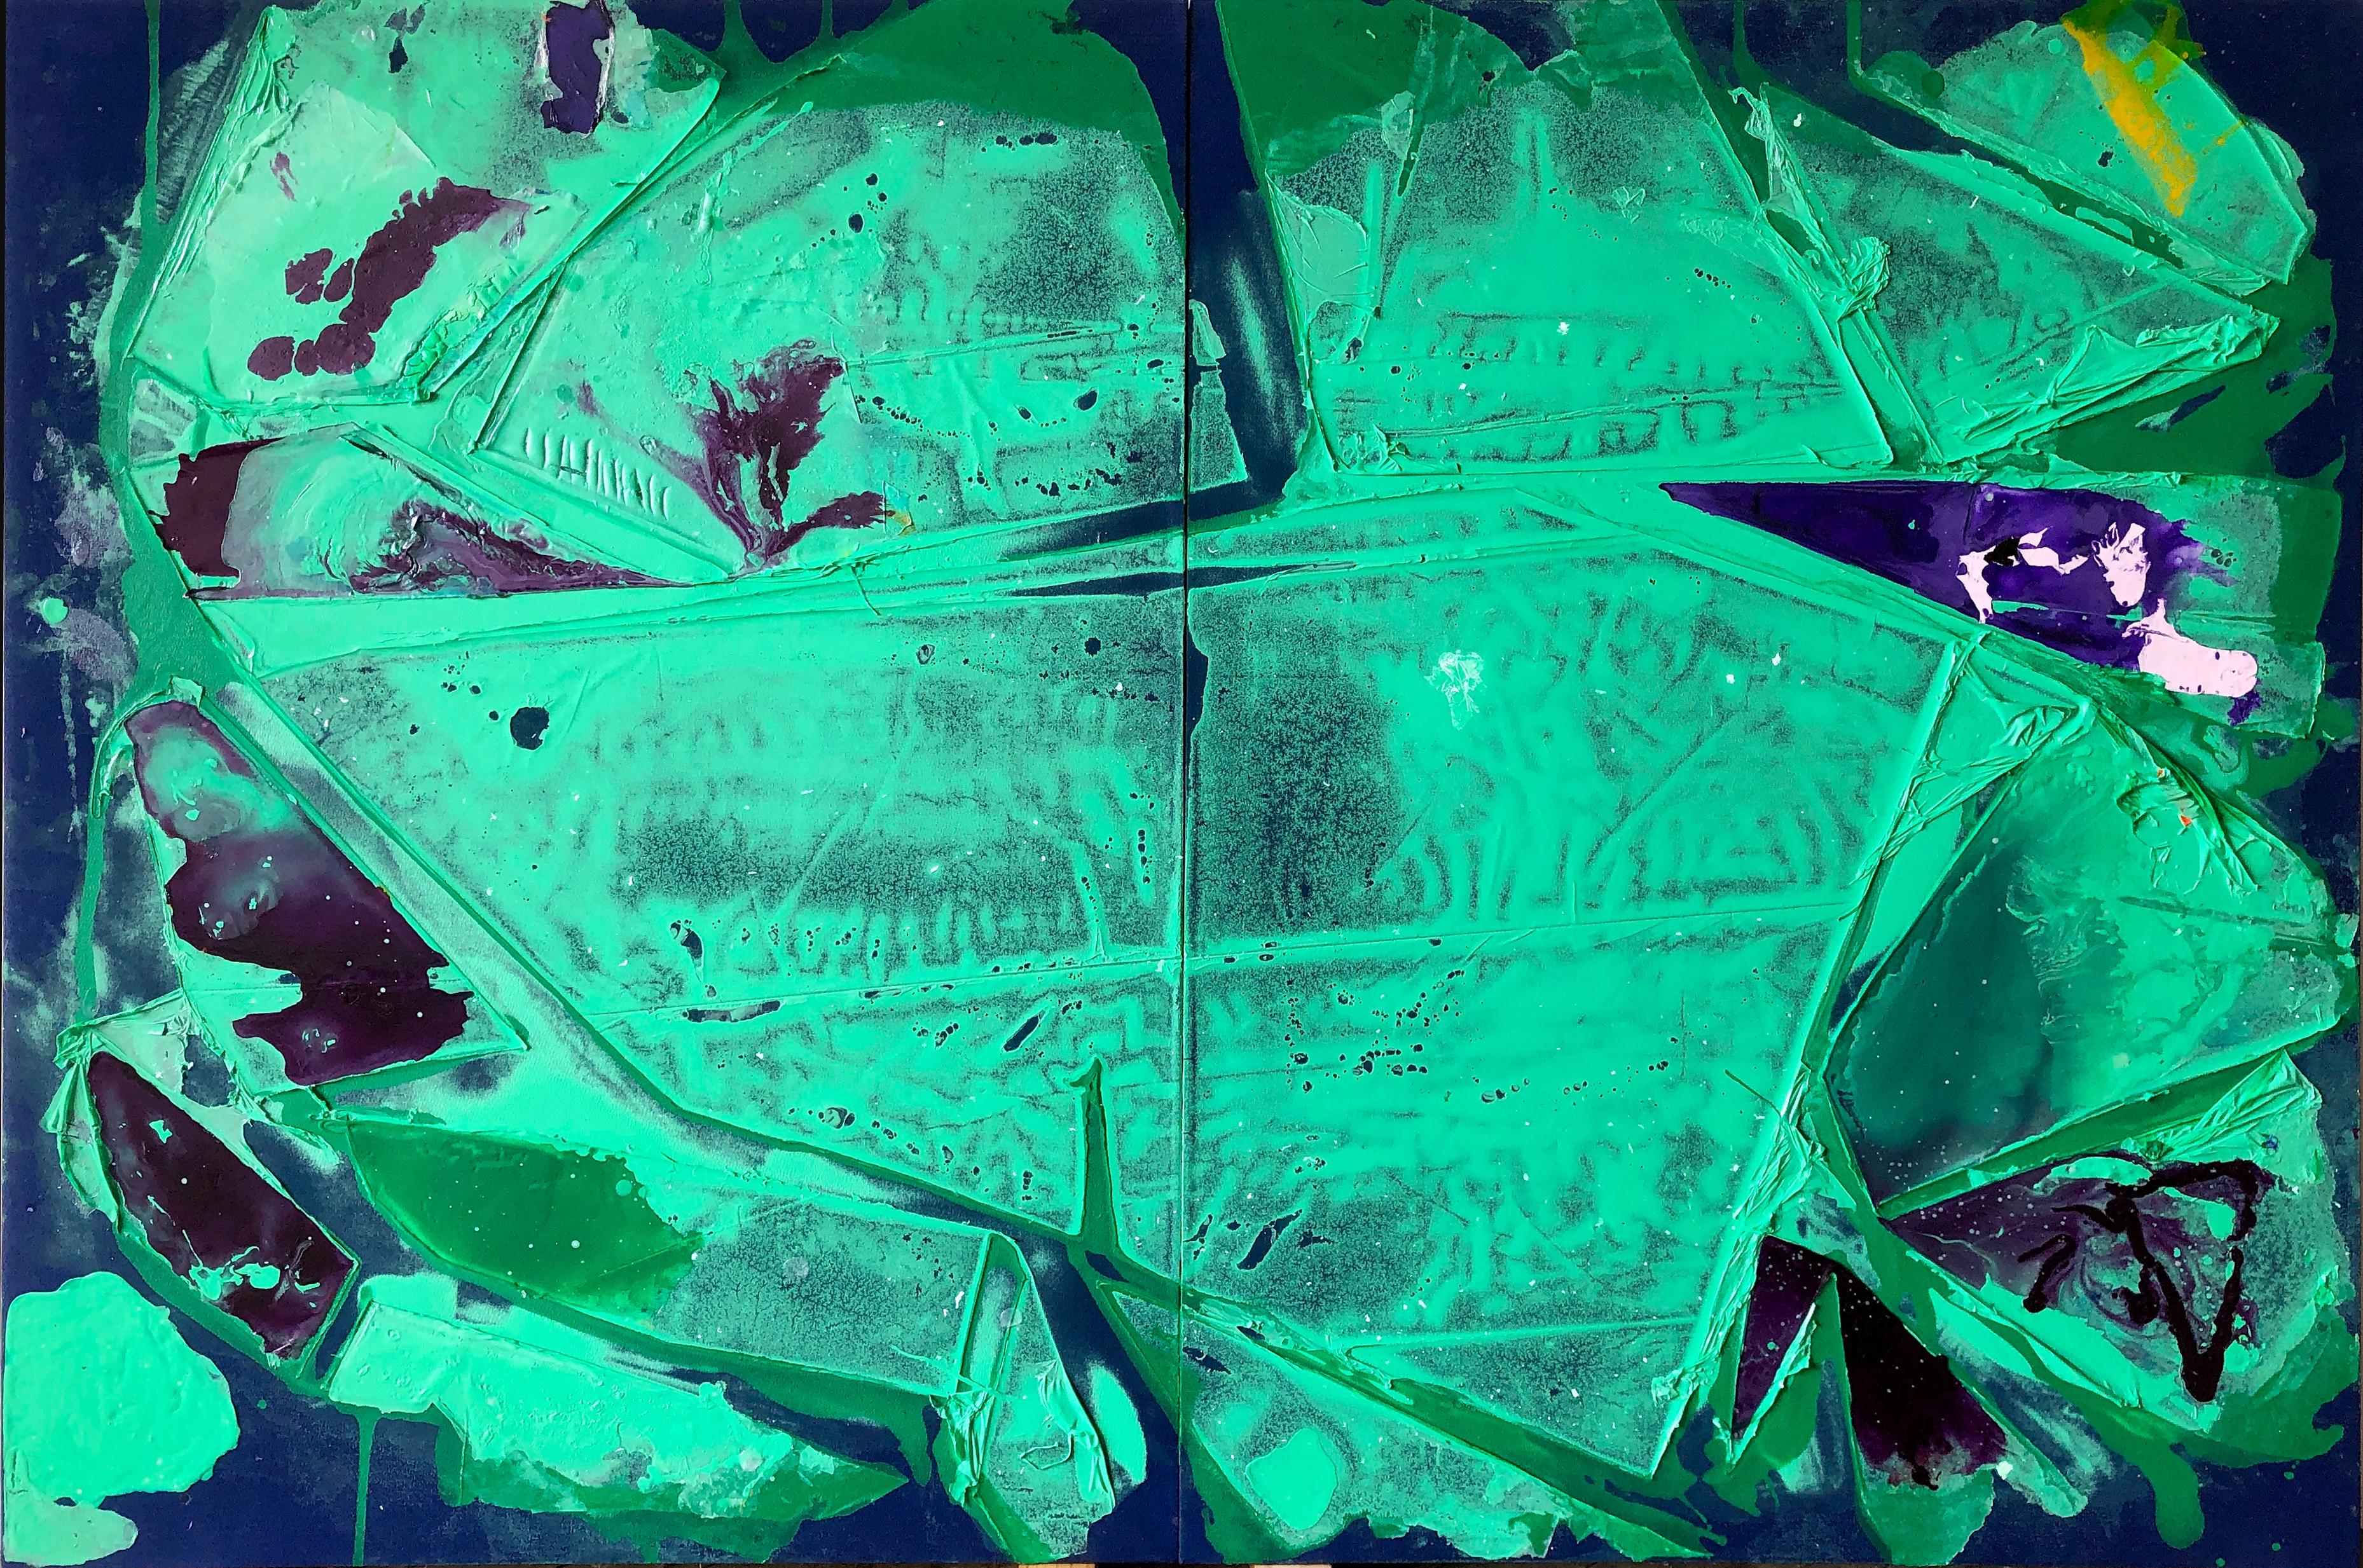 Jeffrey Kurland Landscape Painting - "FLASH FLOODS", Abstract Painting, Diptych, Indigo, Violet, Green, Acrylic